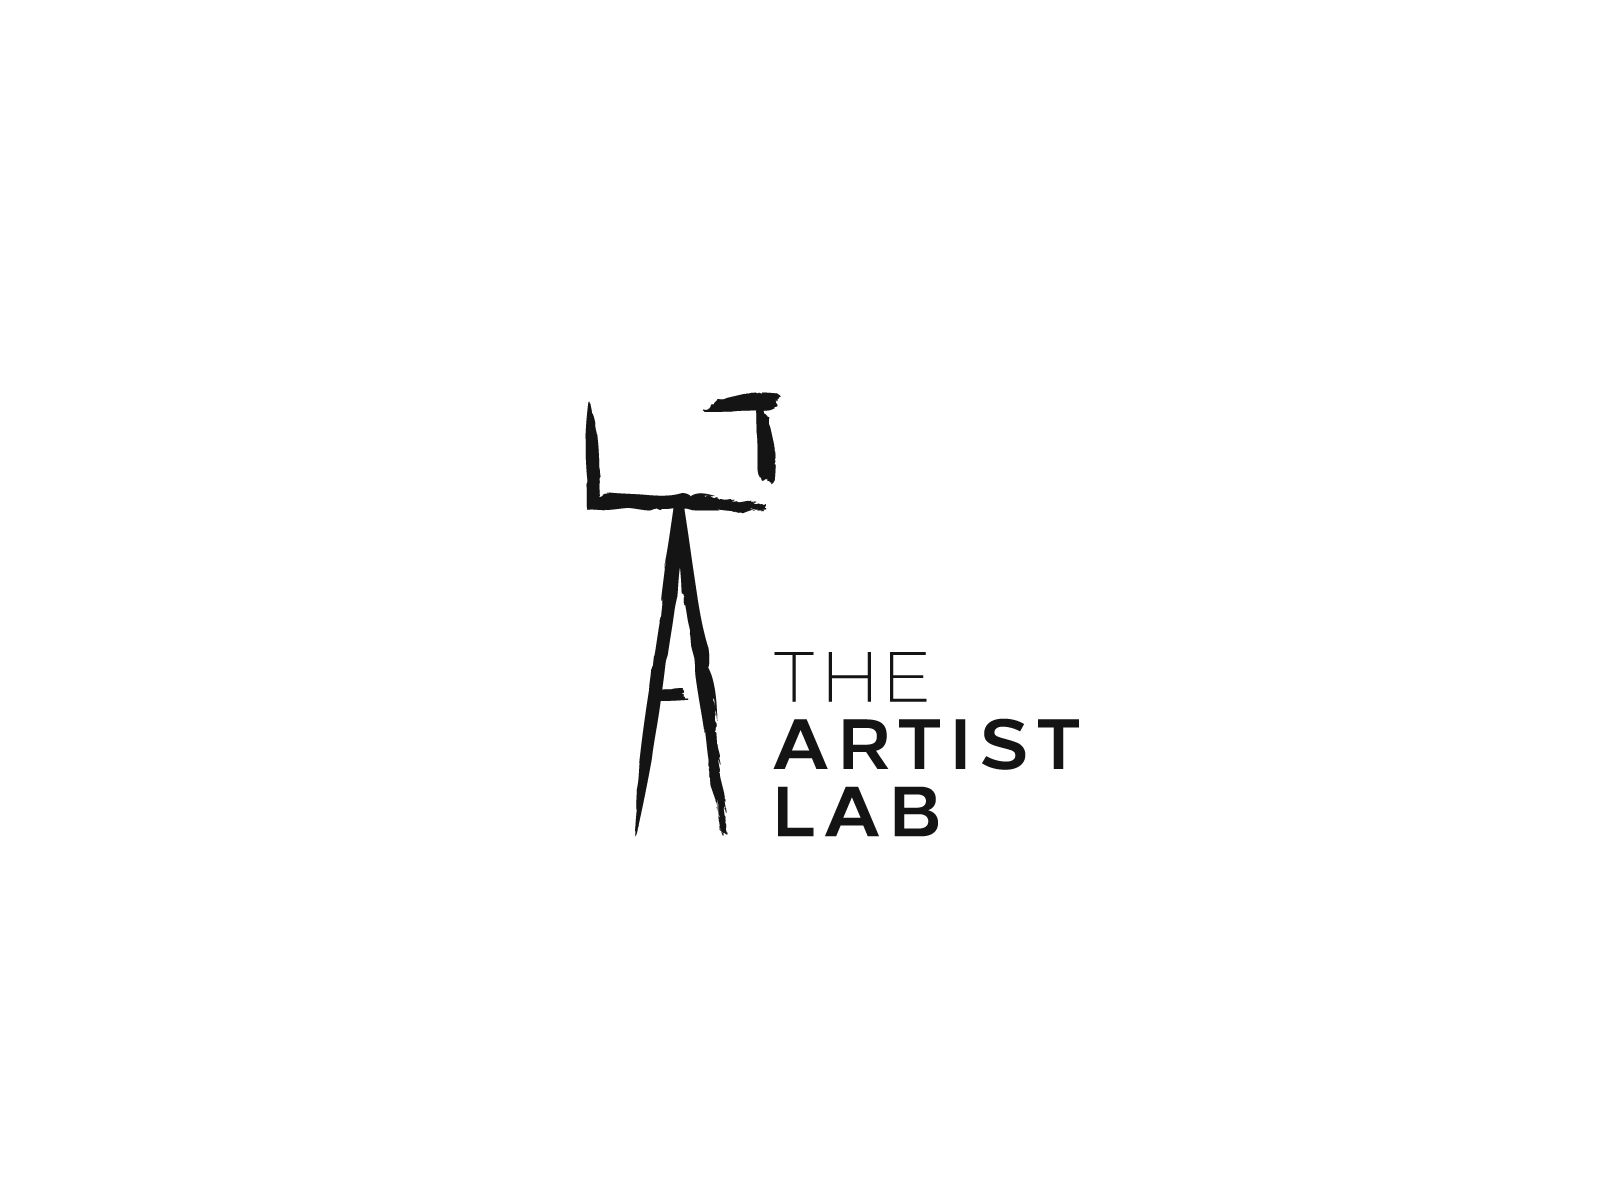 The ARTIST LAB by Milan Zubic on Dribbble